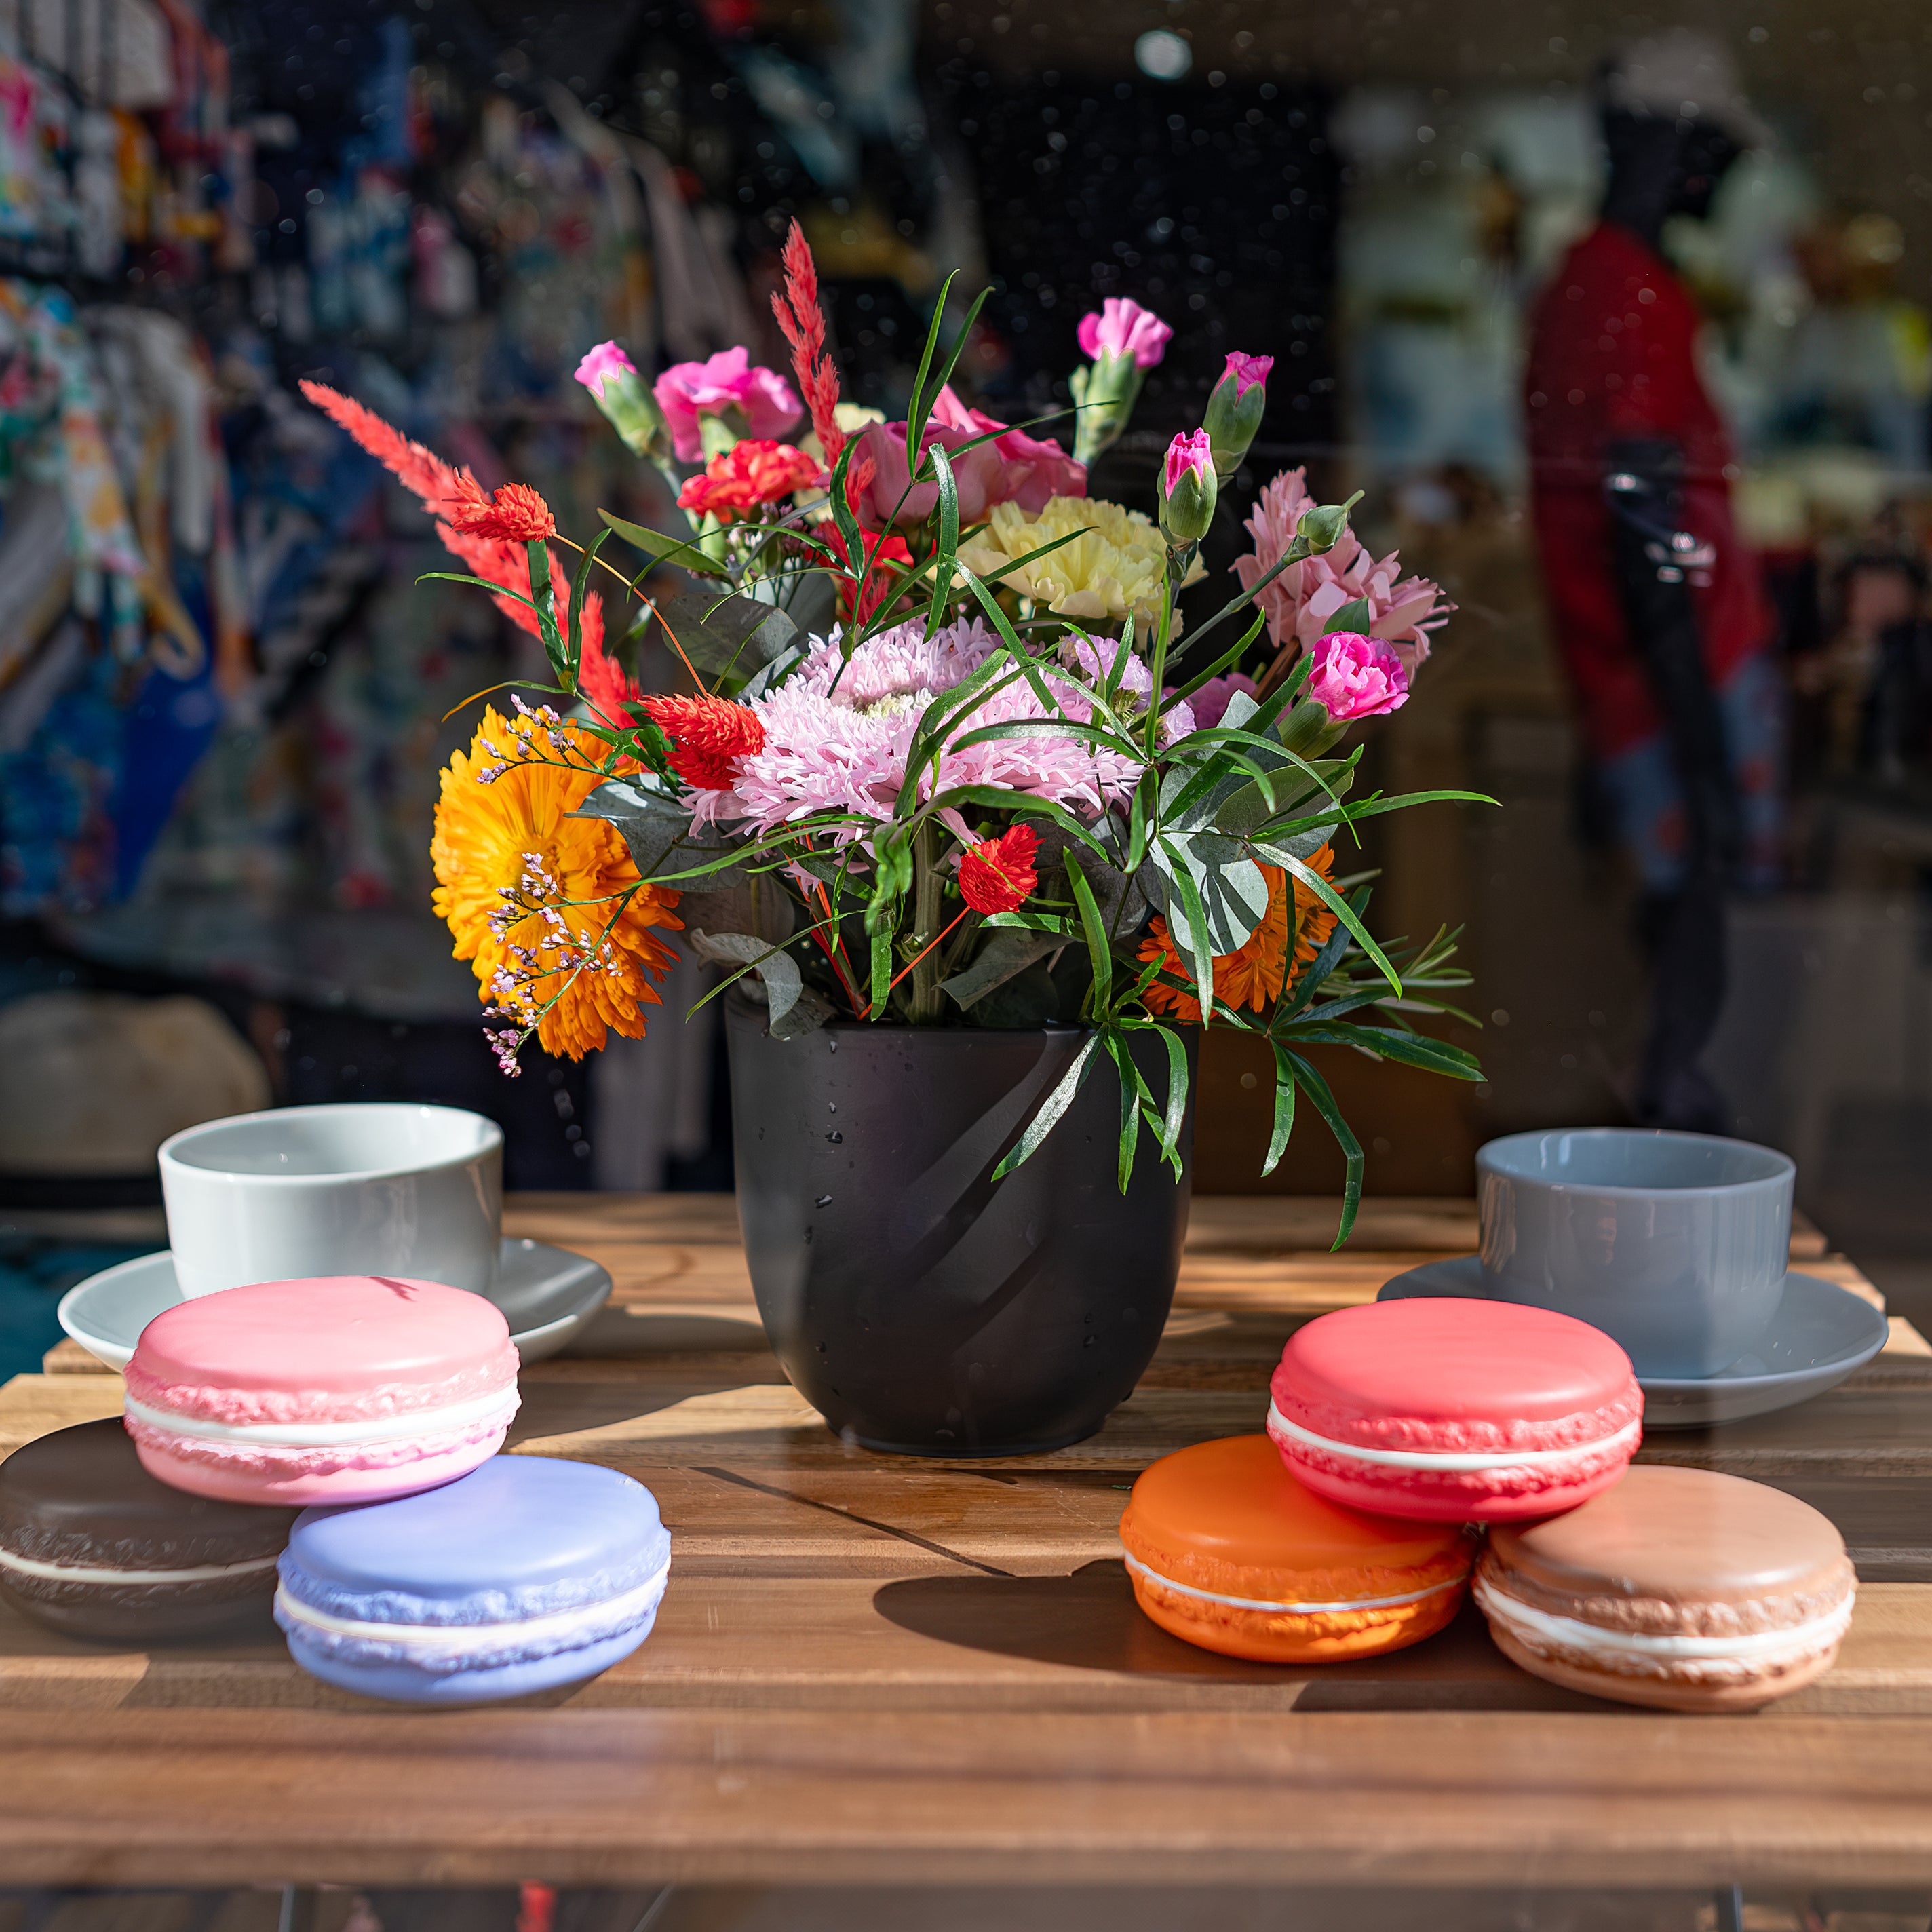 A vibrant bouquet of colourful fresh flowers in an elegant black vase placed on a table with colourful macarons enhances the Vilebrequin storefront for Chelsea in Bloom - Amaranté London.